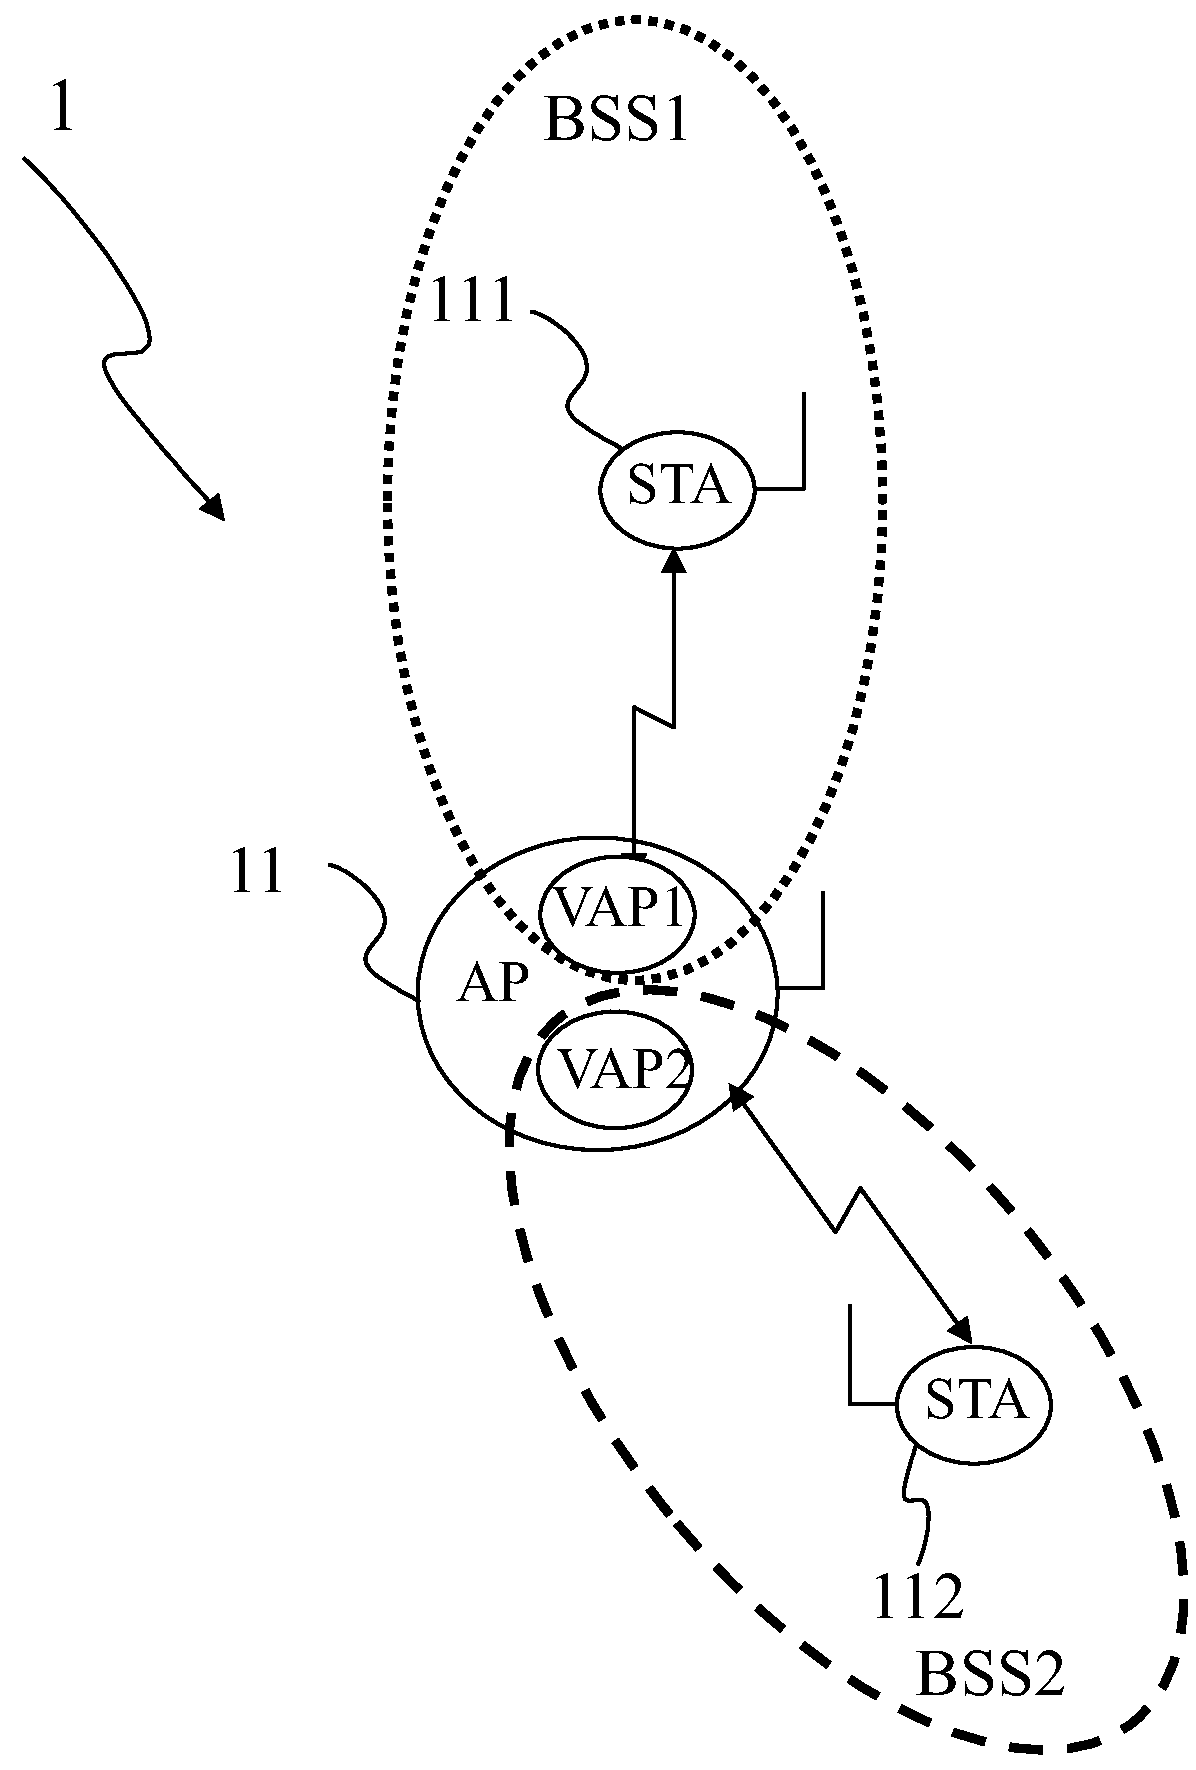 Method of establishing a first and a second association which are decoupled